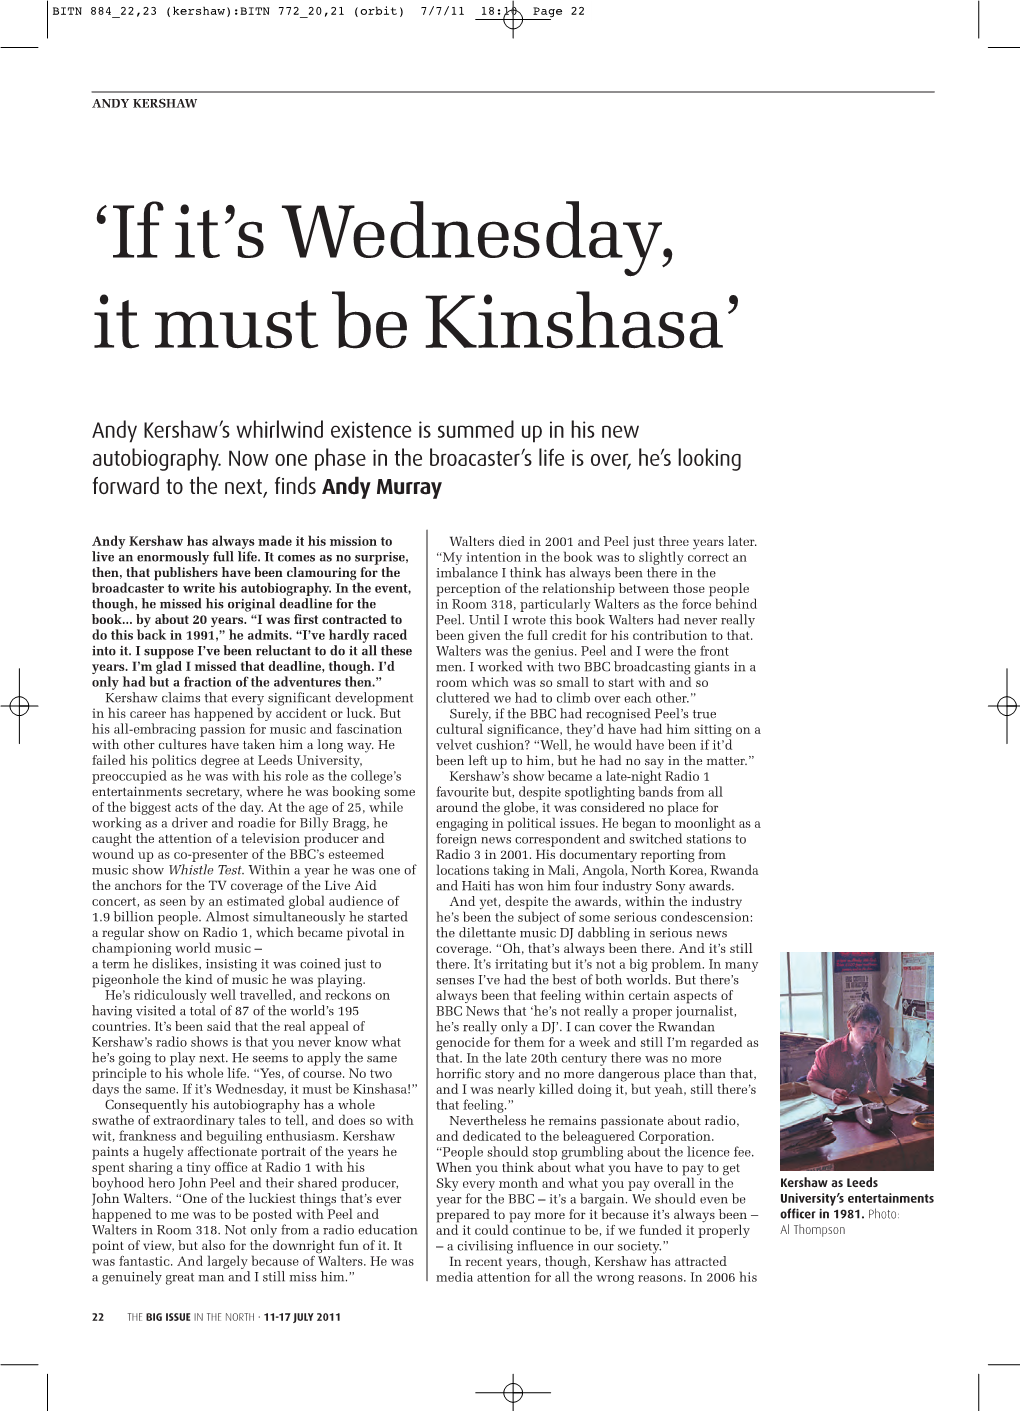 'If It's Wednesday, It Must Be Kinshasa'